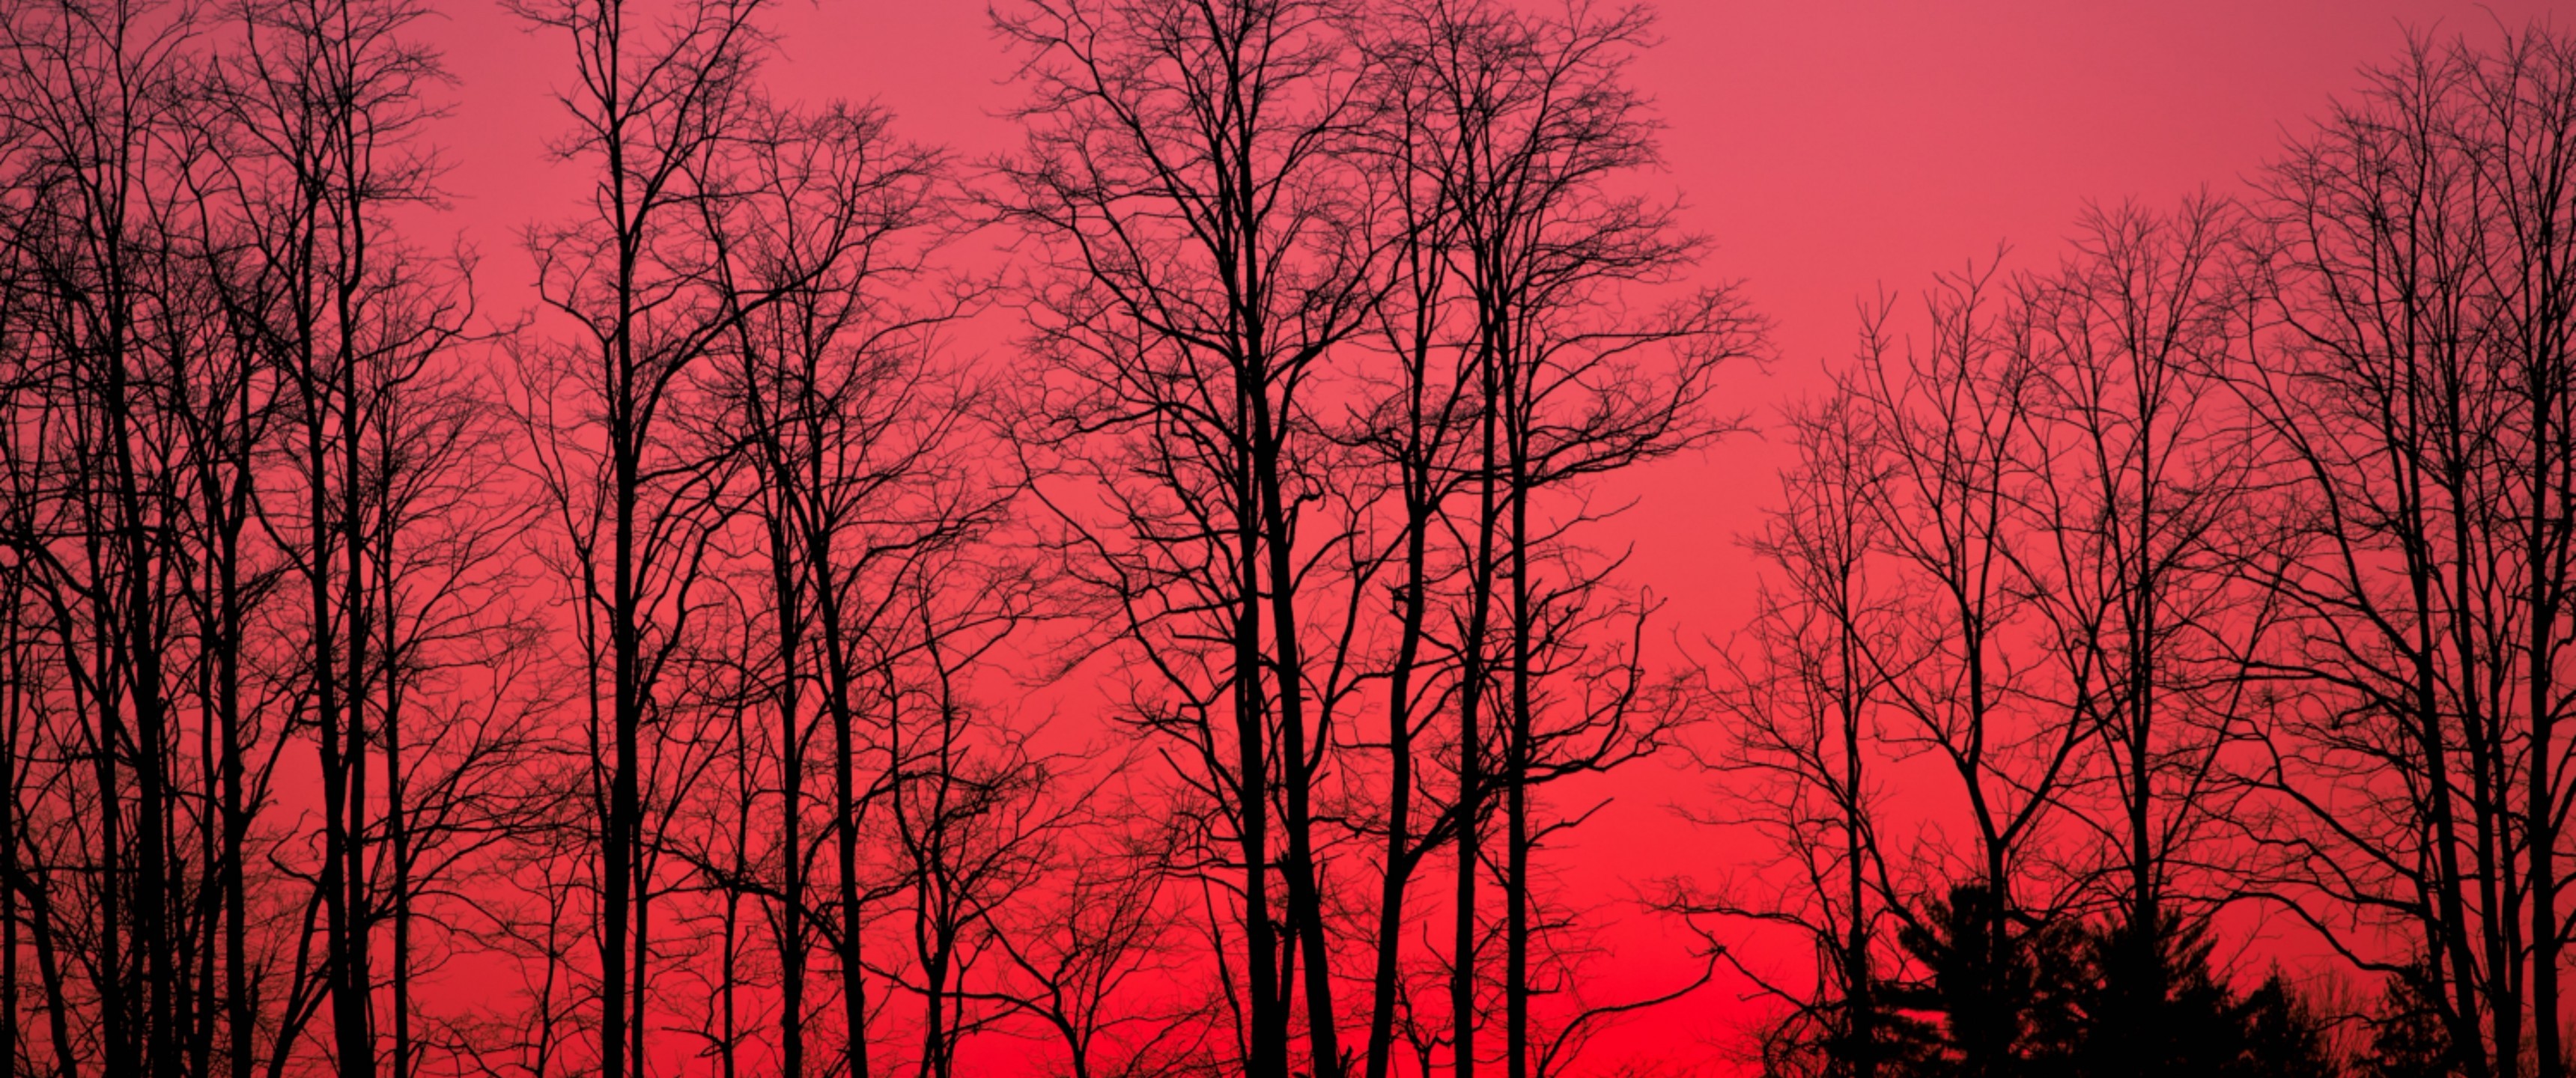 Red Sky, Forest, Tree Silhouette - Red Sky Forest - 3440x1440 Wallpaper -.....